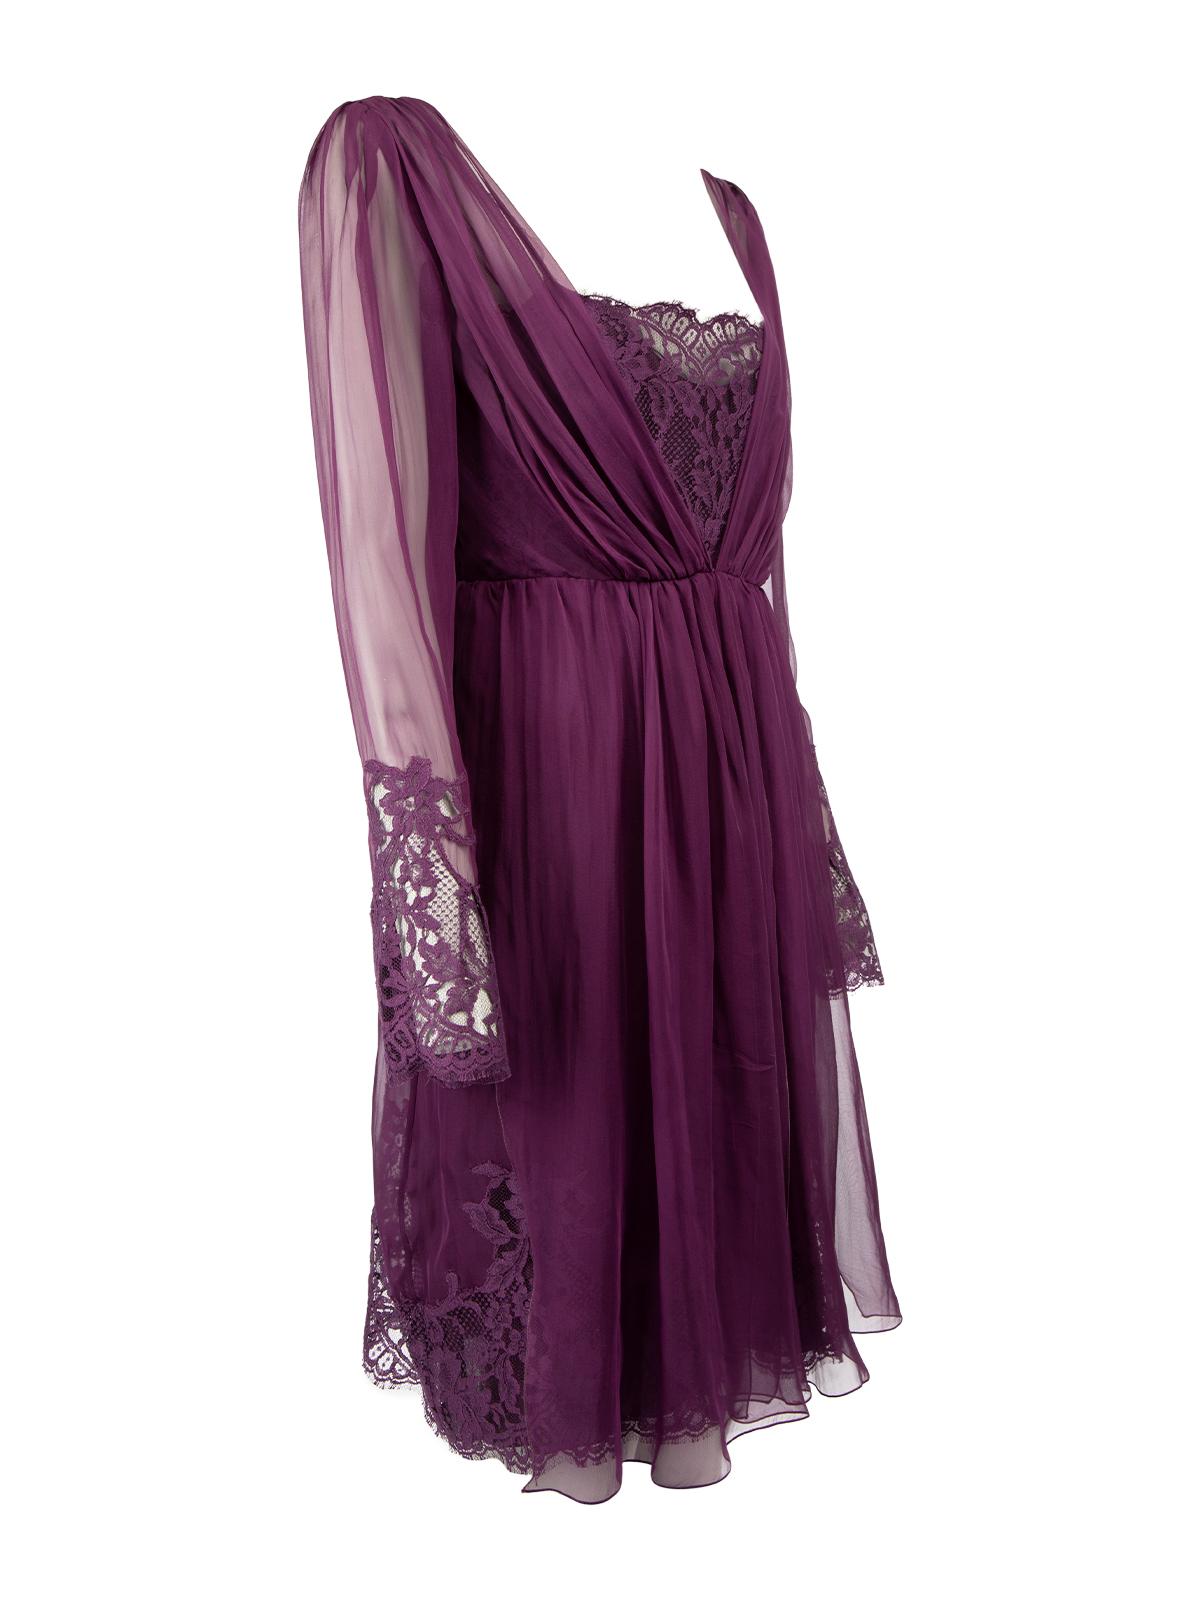 CONDITION is Very good. Hardly any visible wear to dress is evident on this used Alberta Ferreti designer resale item. Details Purple Silk Lace dress V neckline Sleeveless Gathering detail on front Single vent on front Side zip fastening with hook